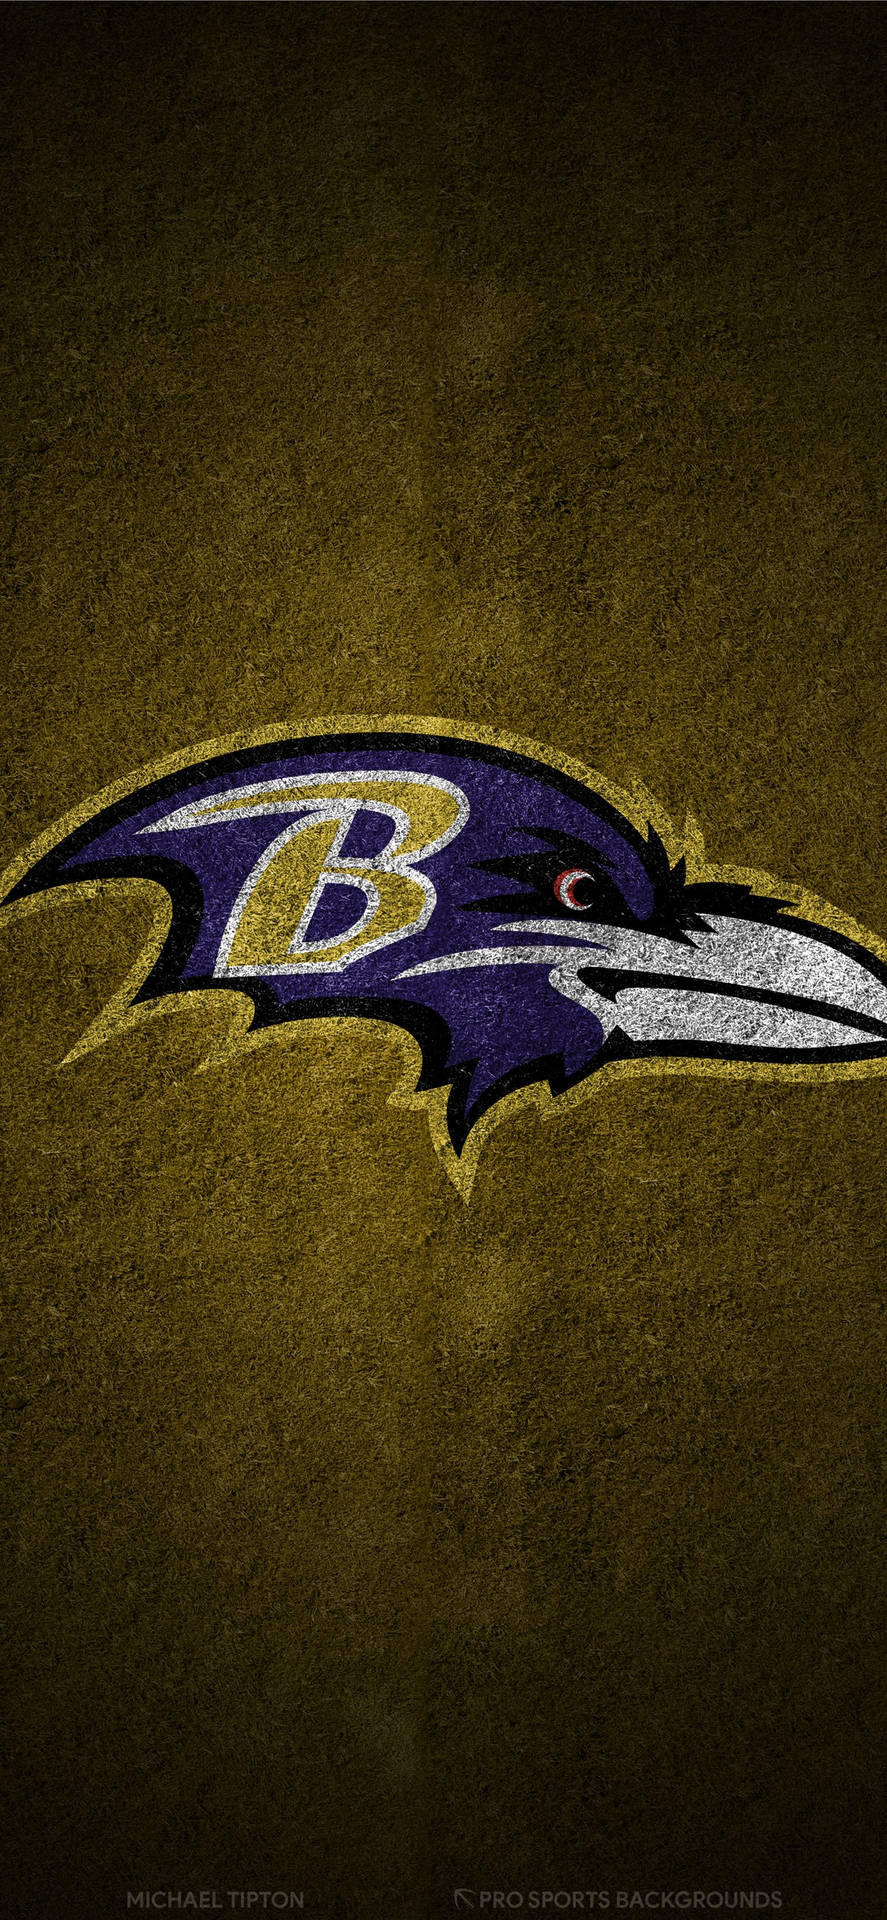 Show your support for the Baltimore Ravens with an iPhone Wallpaper